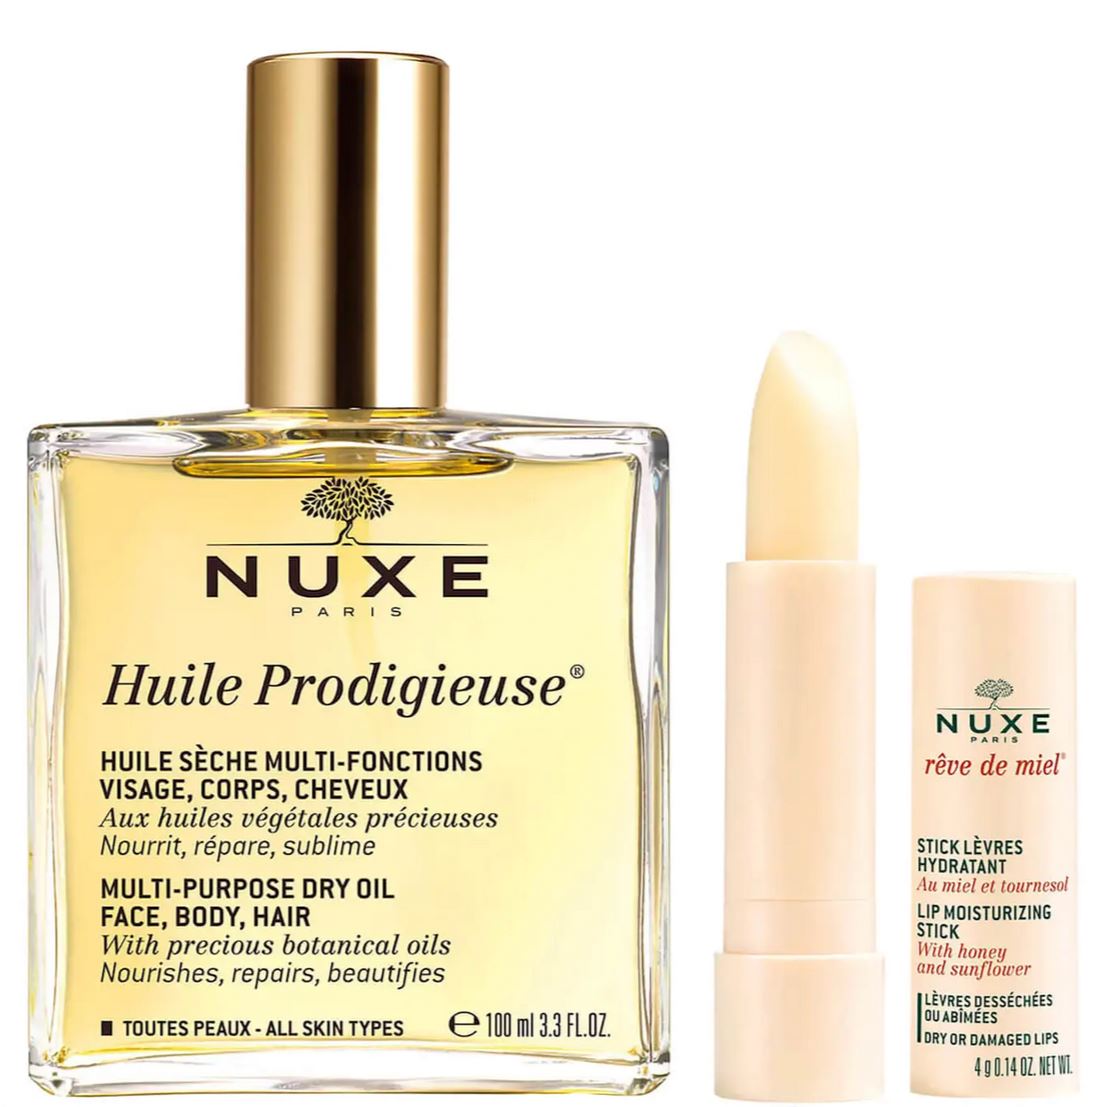 Nuxe Huile Prodigieuse Oil and Lip Stick Duo ($41 Value) Nuxe Shop at Exclusive Beauty Club